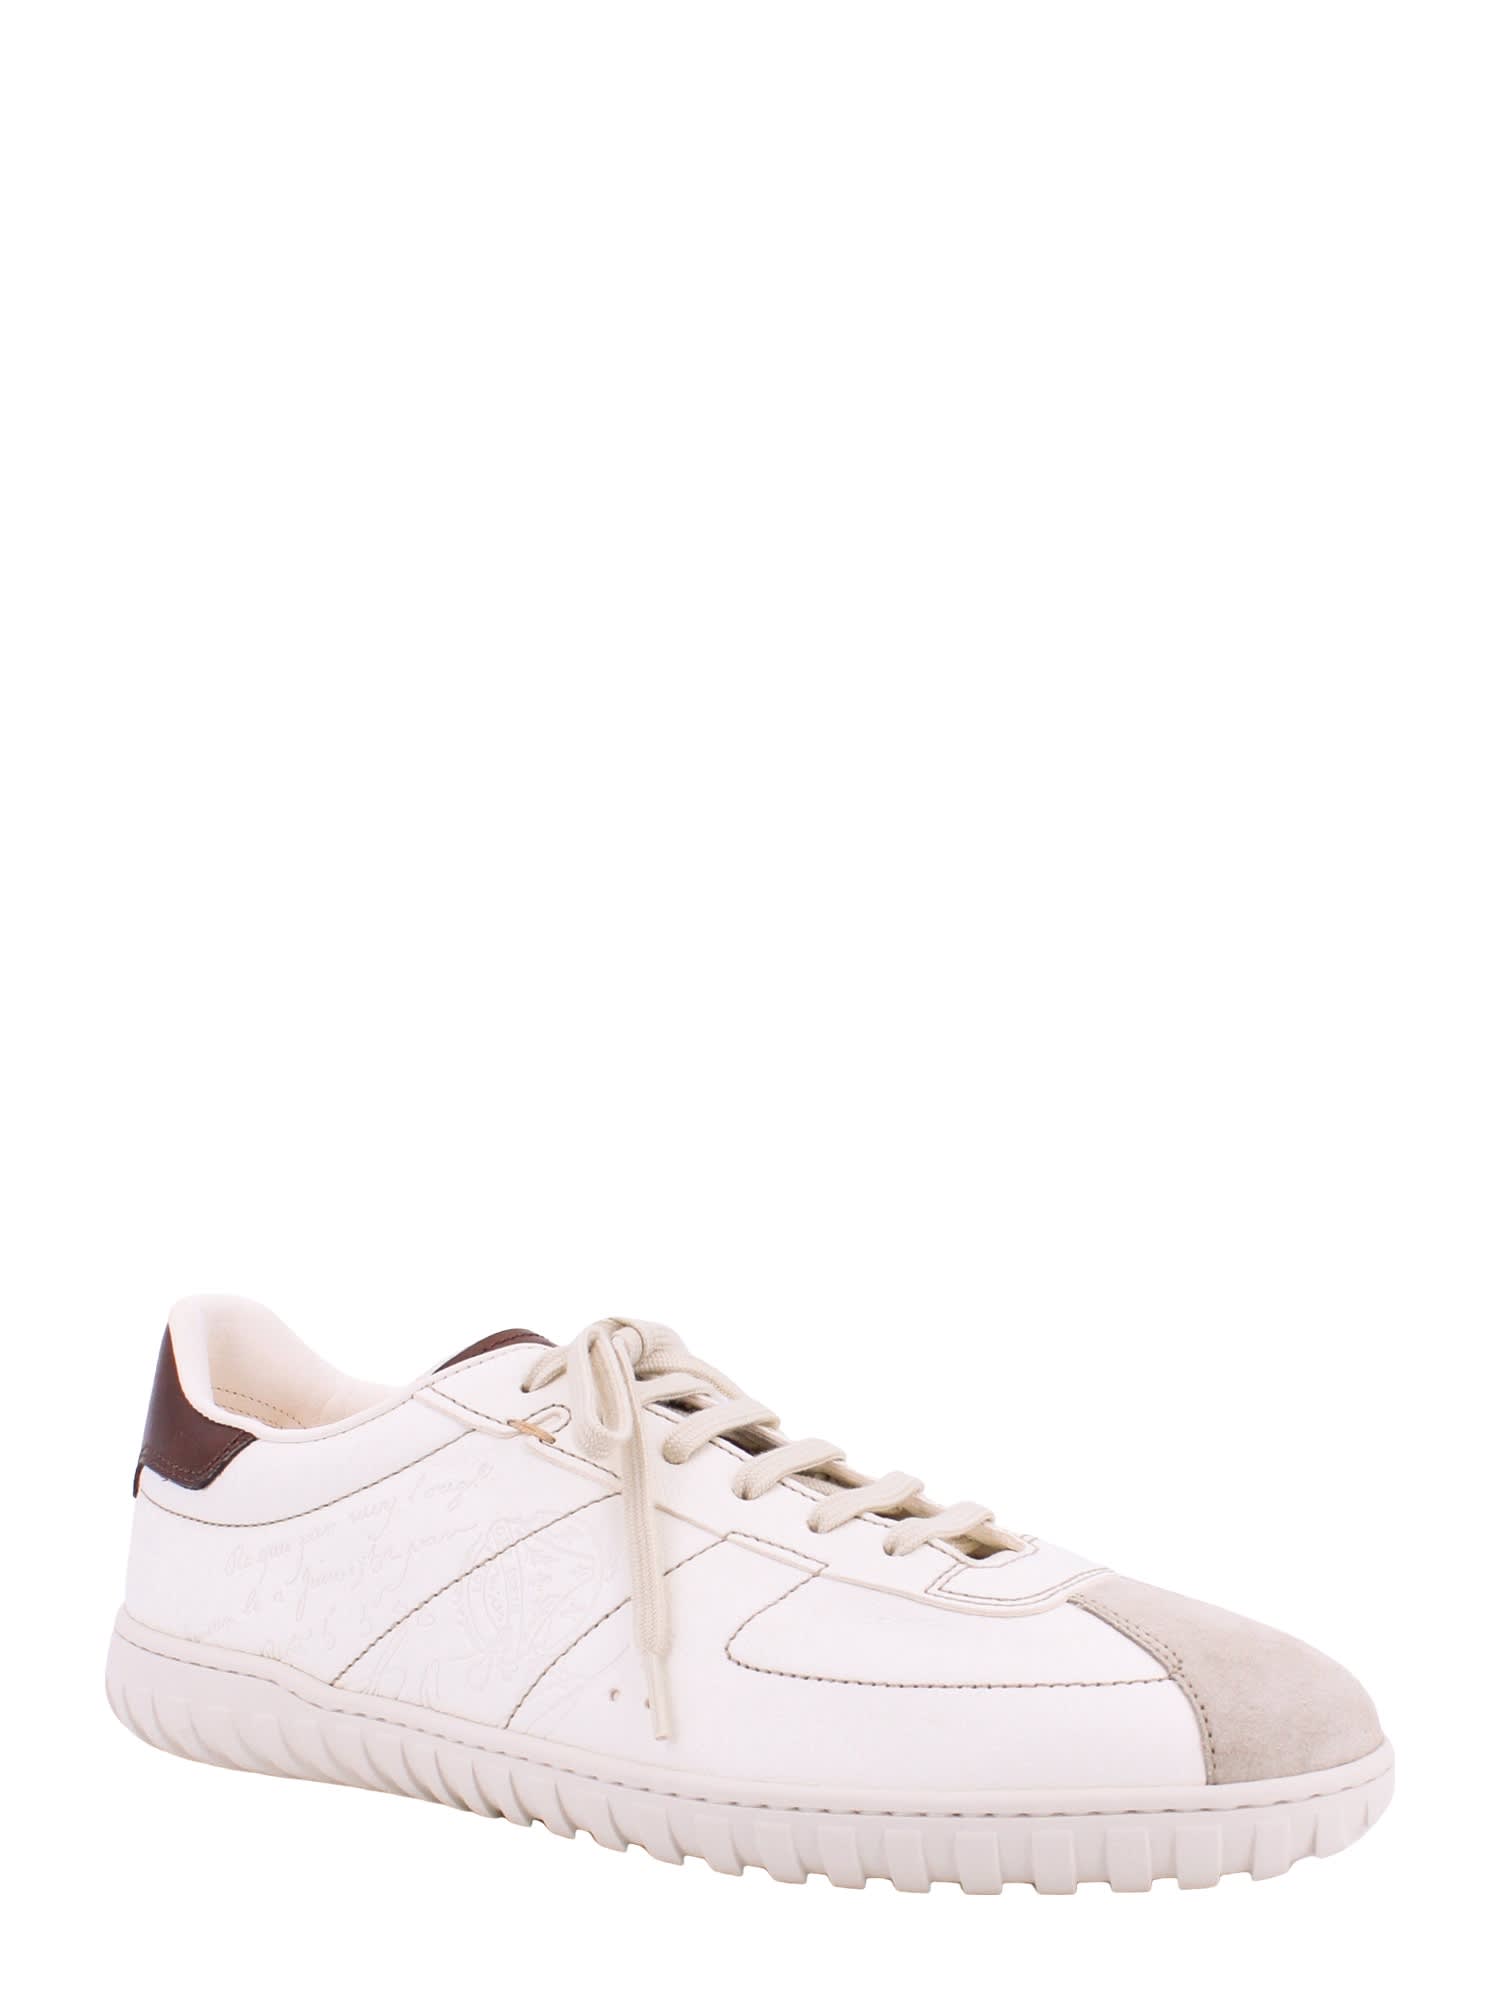 Berluti Signature Graphic Leather Sneakers Trainers Shoes Trainers